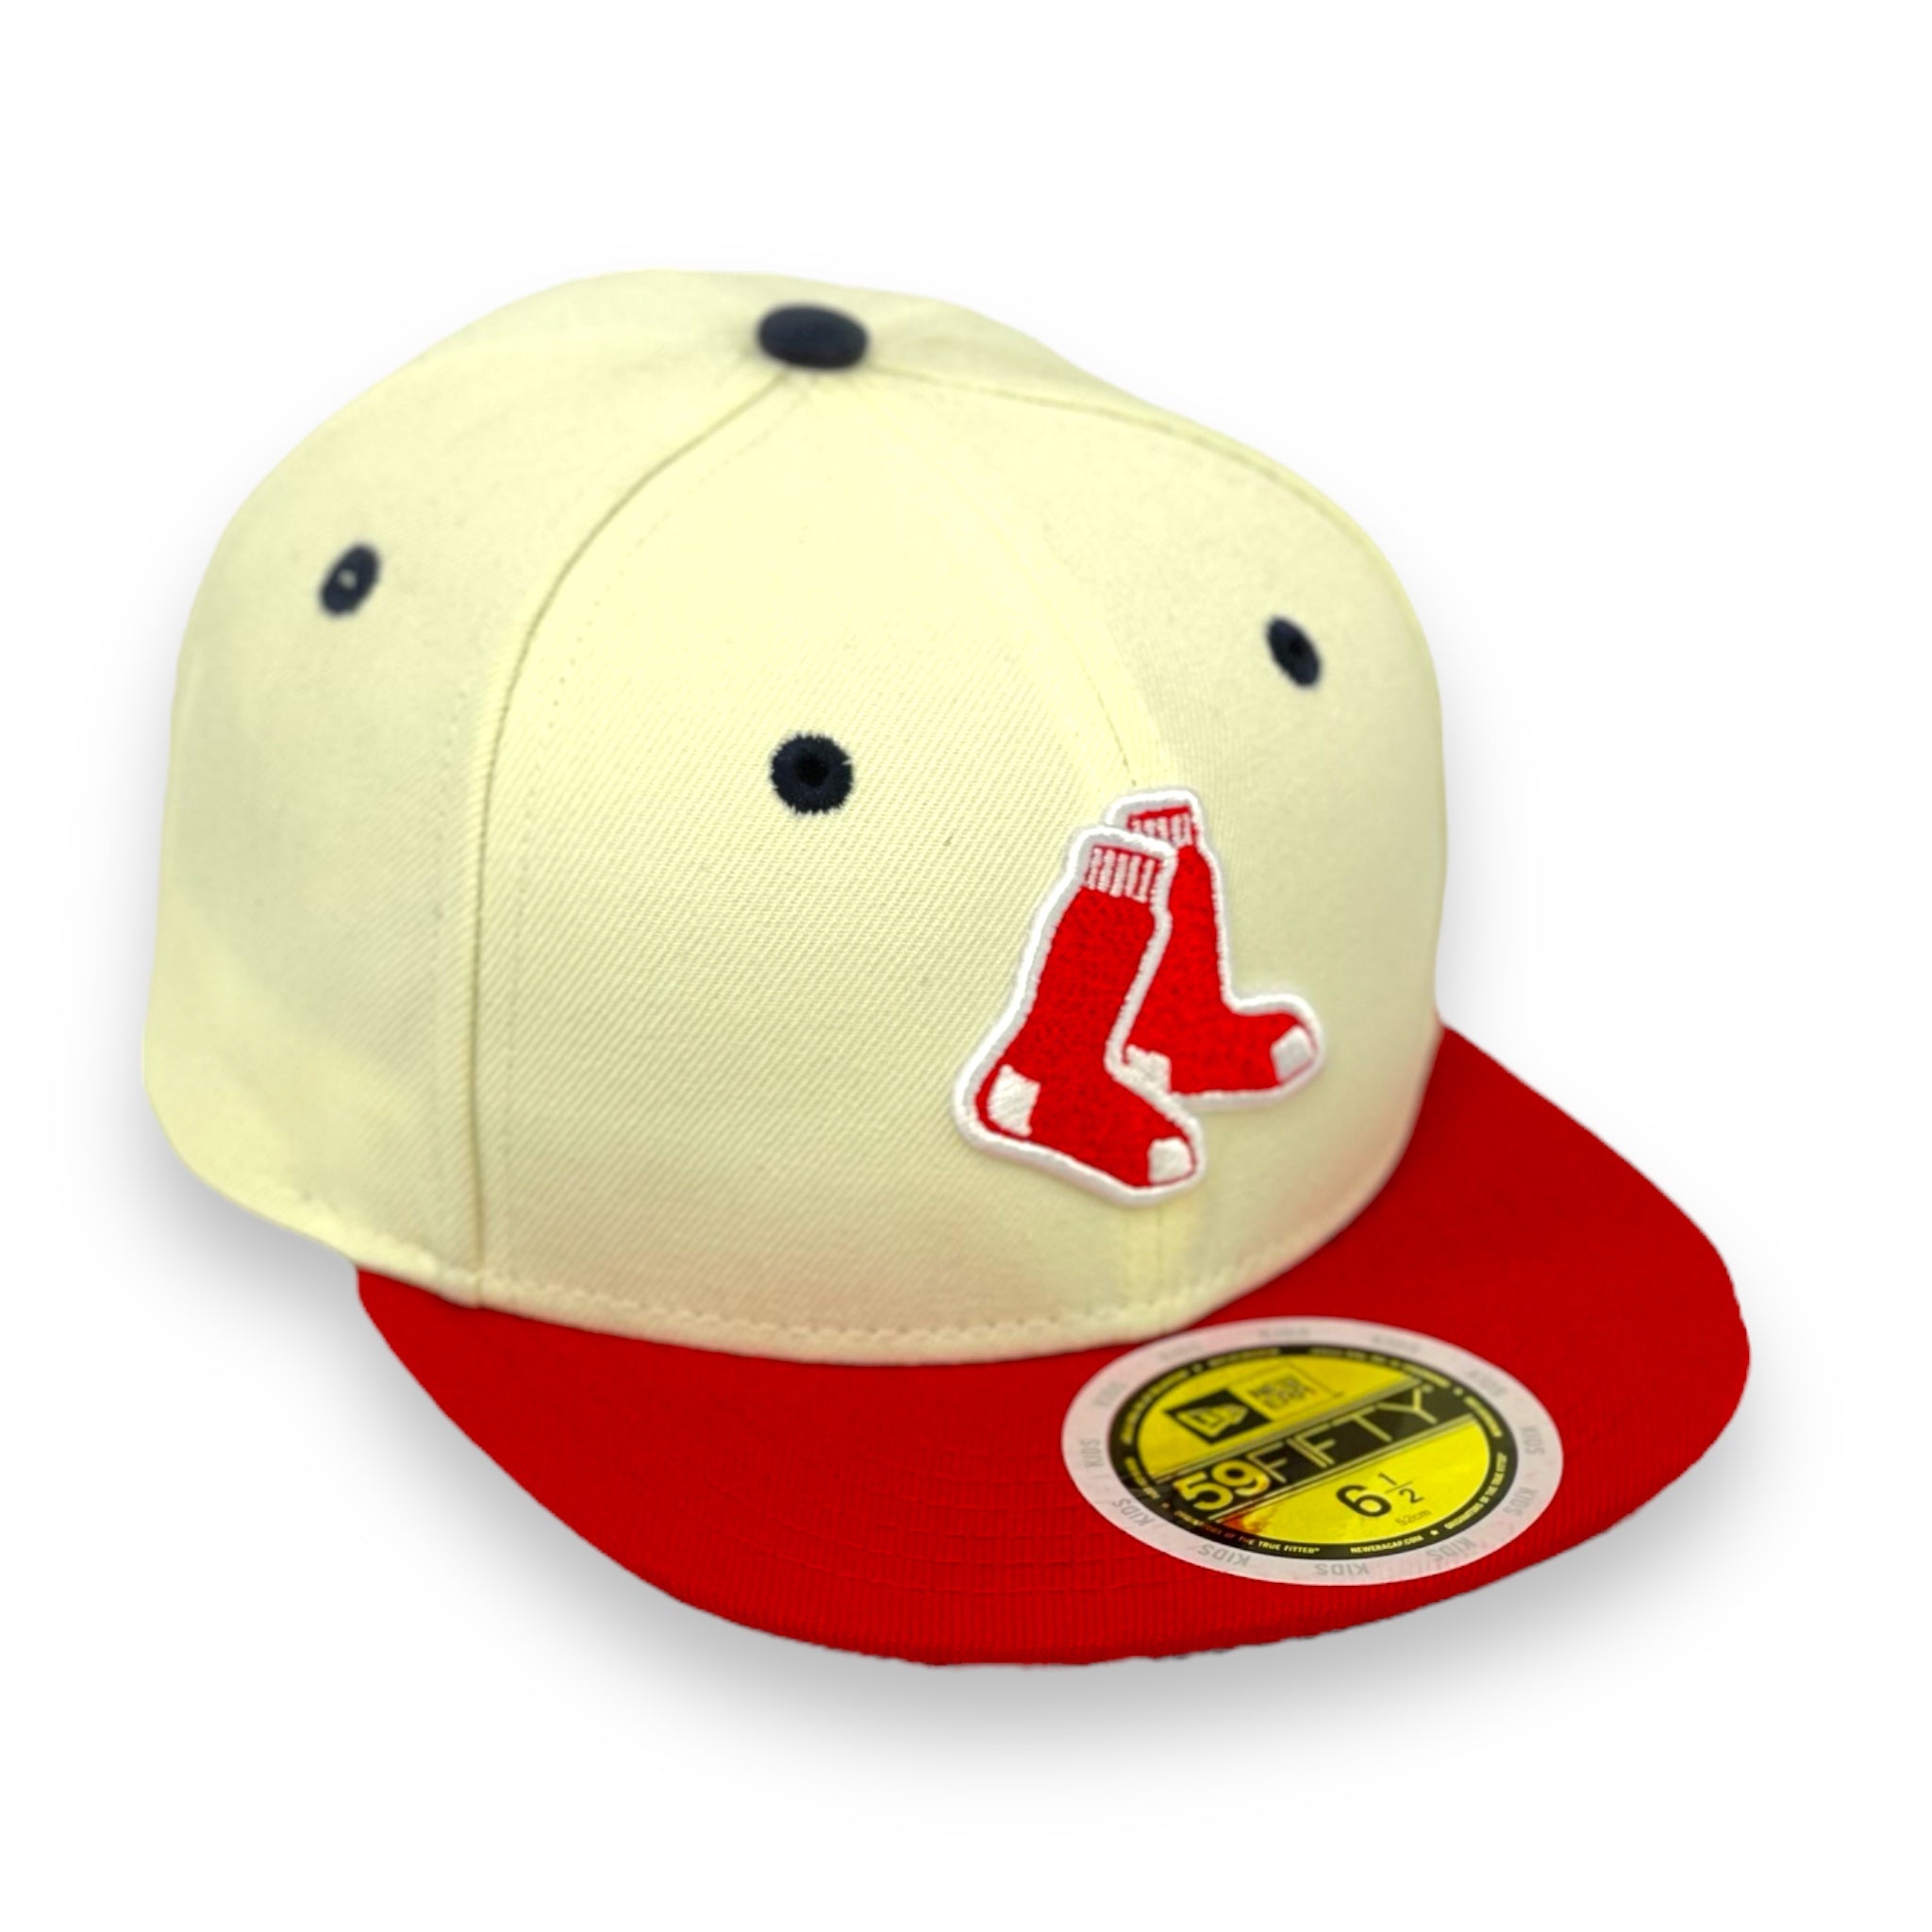 “KIDS” - BOSTON REDSOX (OFF-WHITE) NEW ERA 59FIFTY FITTED